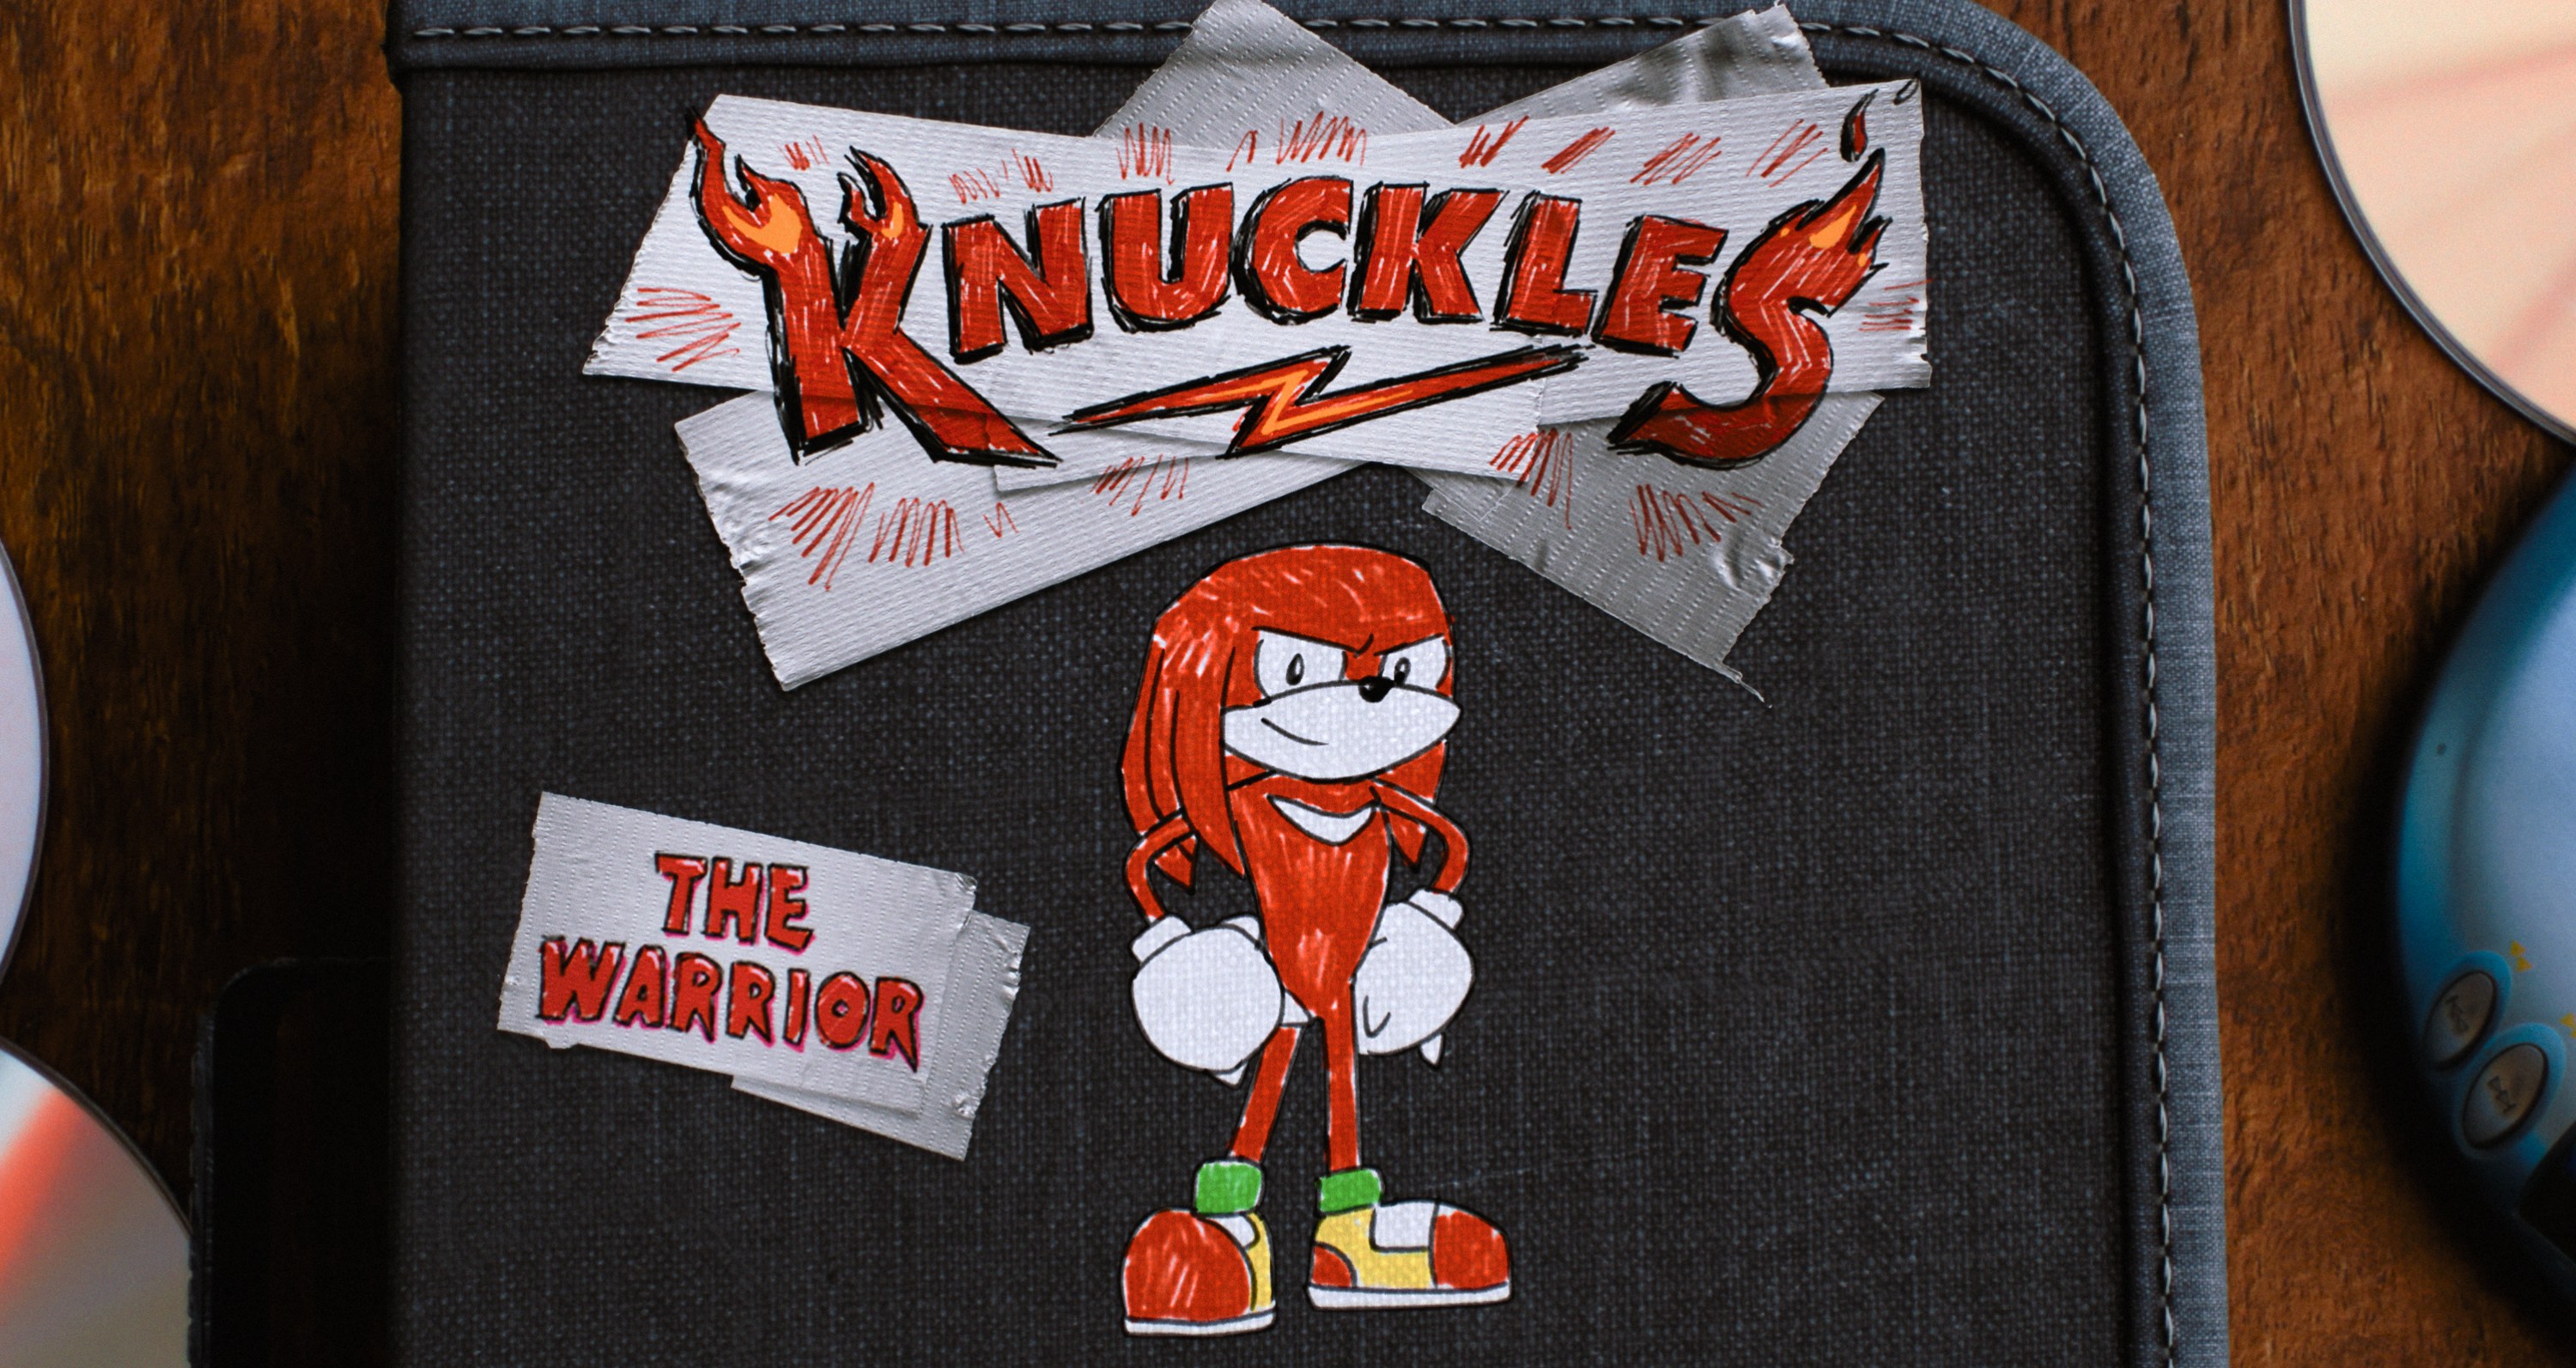 'Knuckles' opening titles